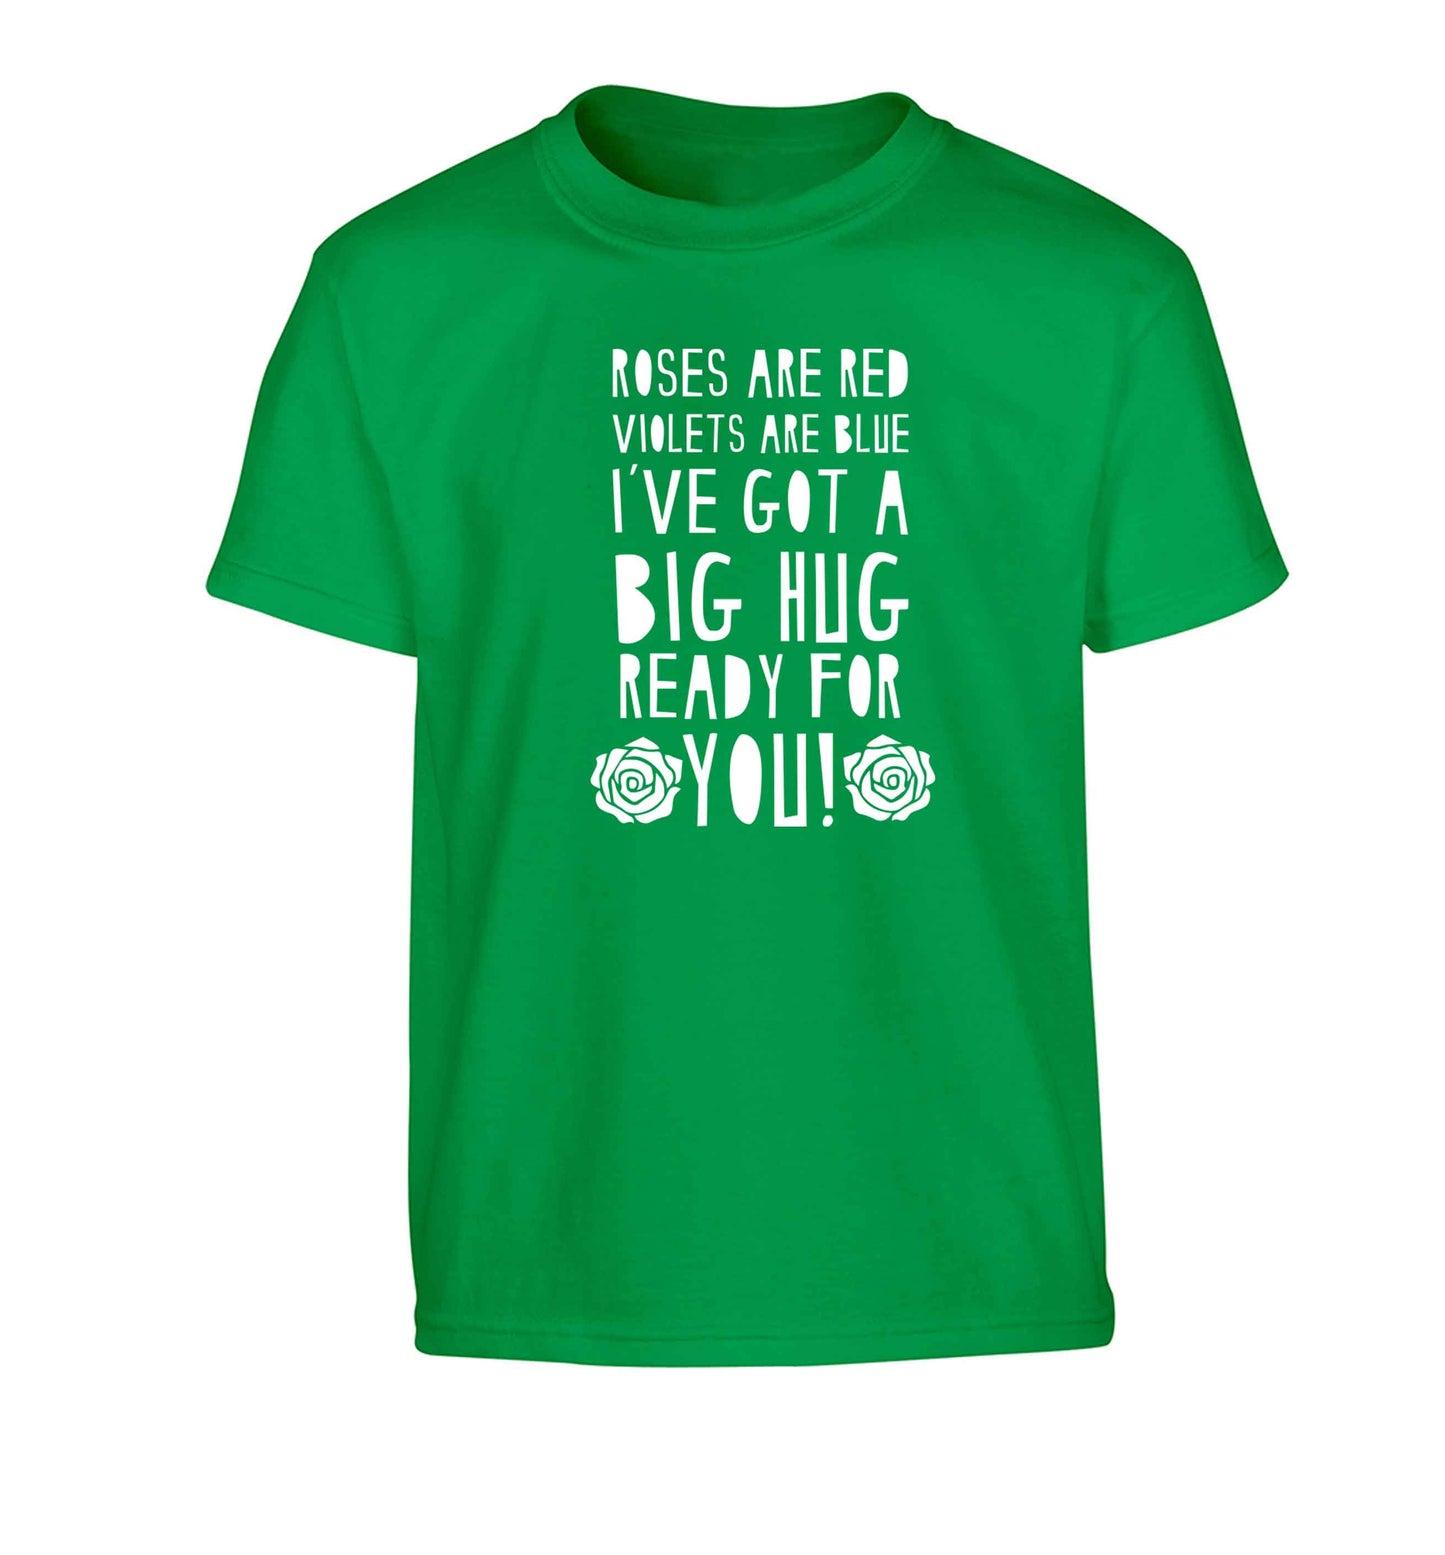 Roses are red violets are blue I've got a big hug coming for you Children's green Tshirt 12-13 Years